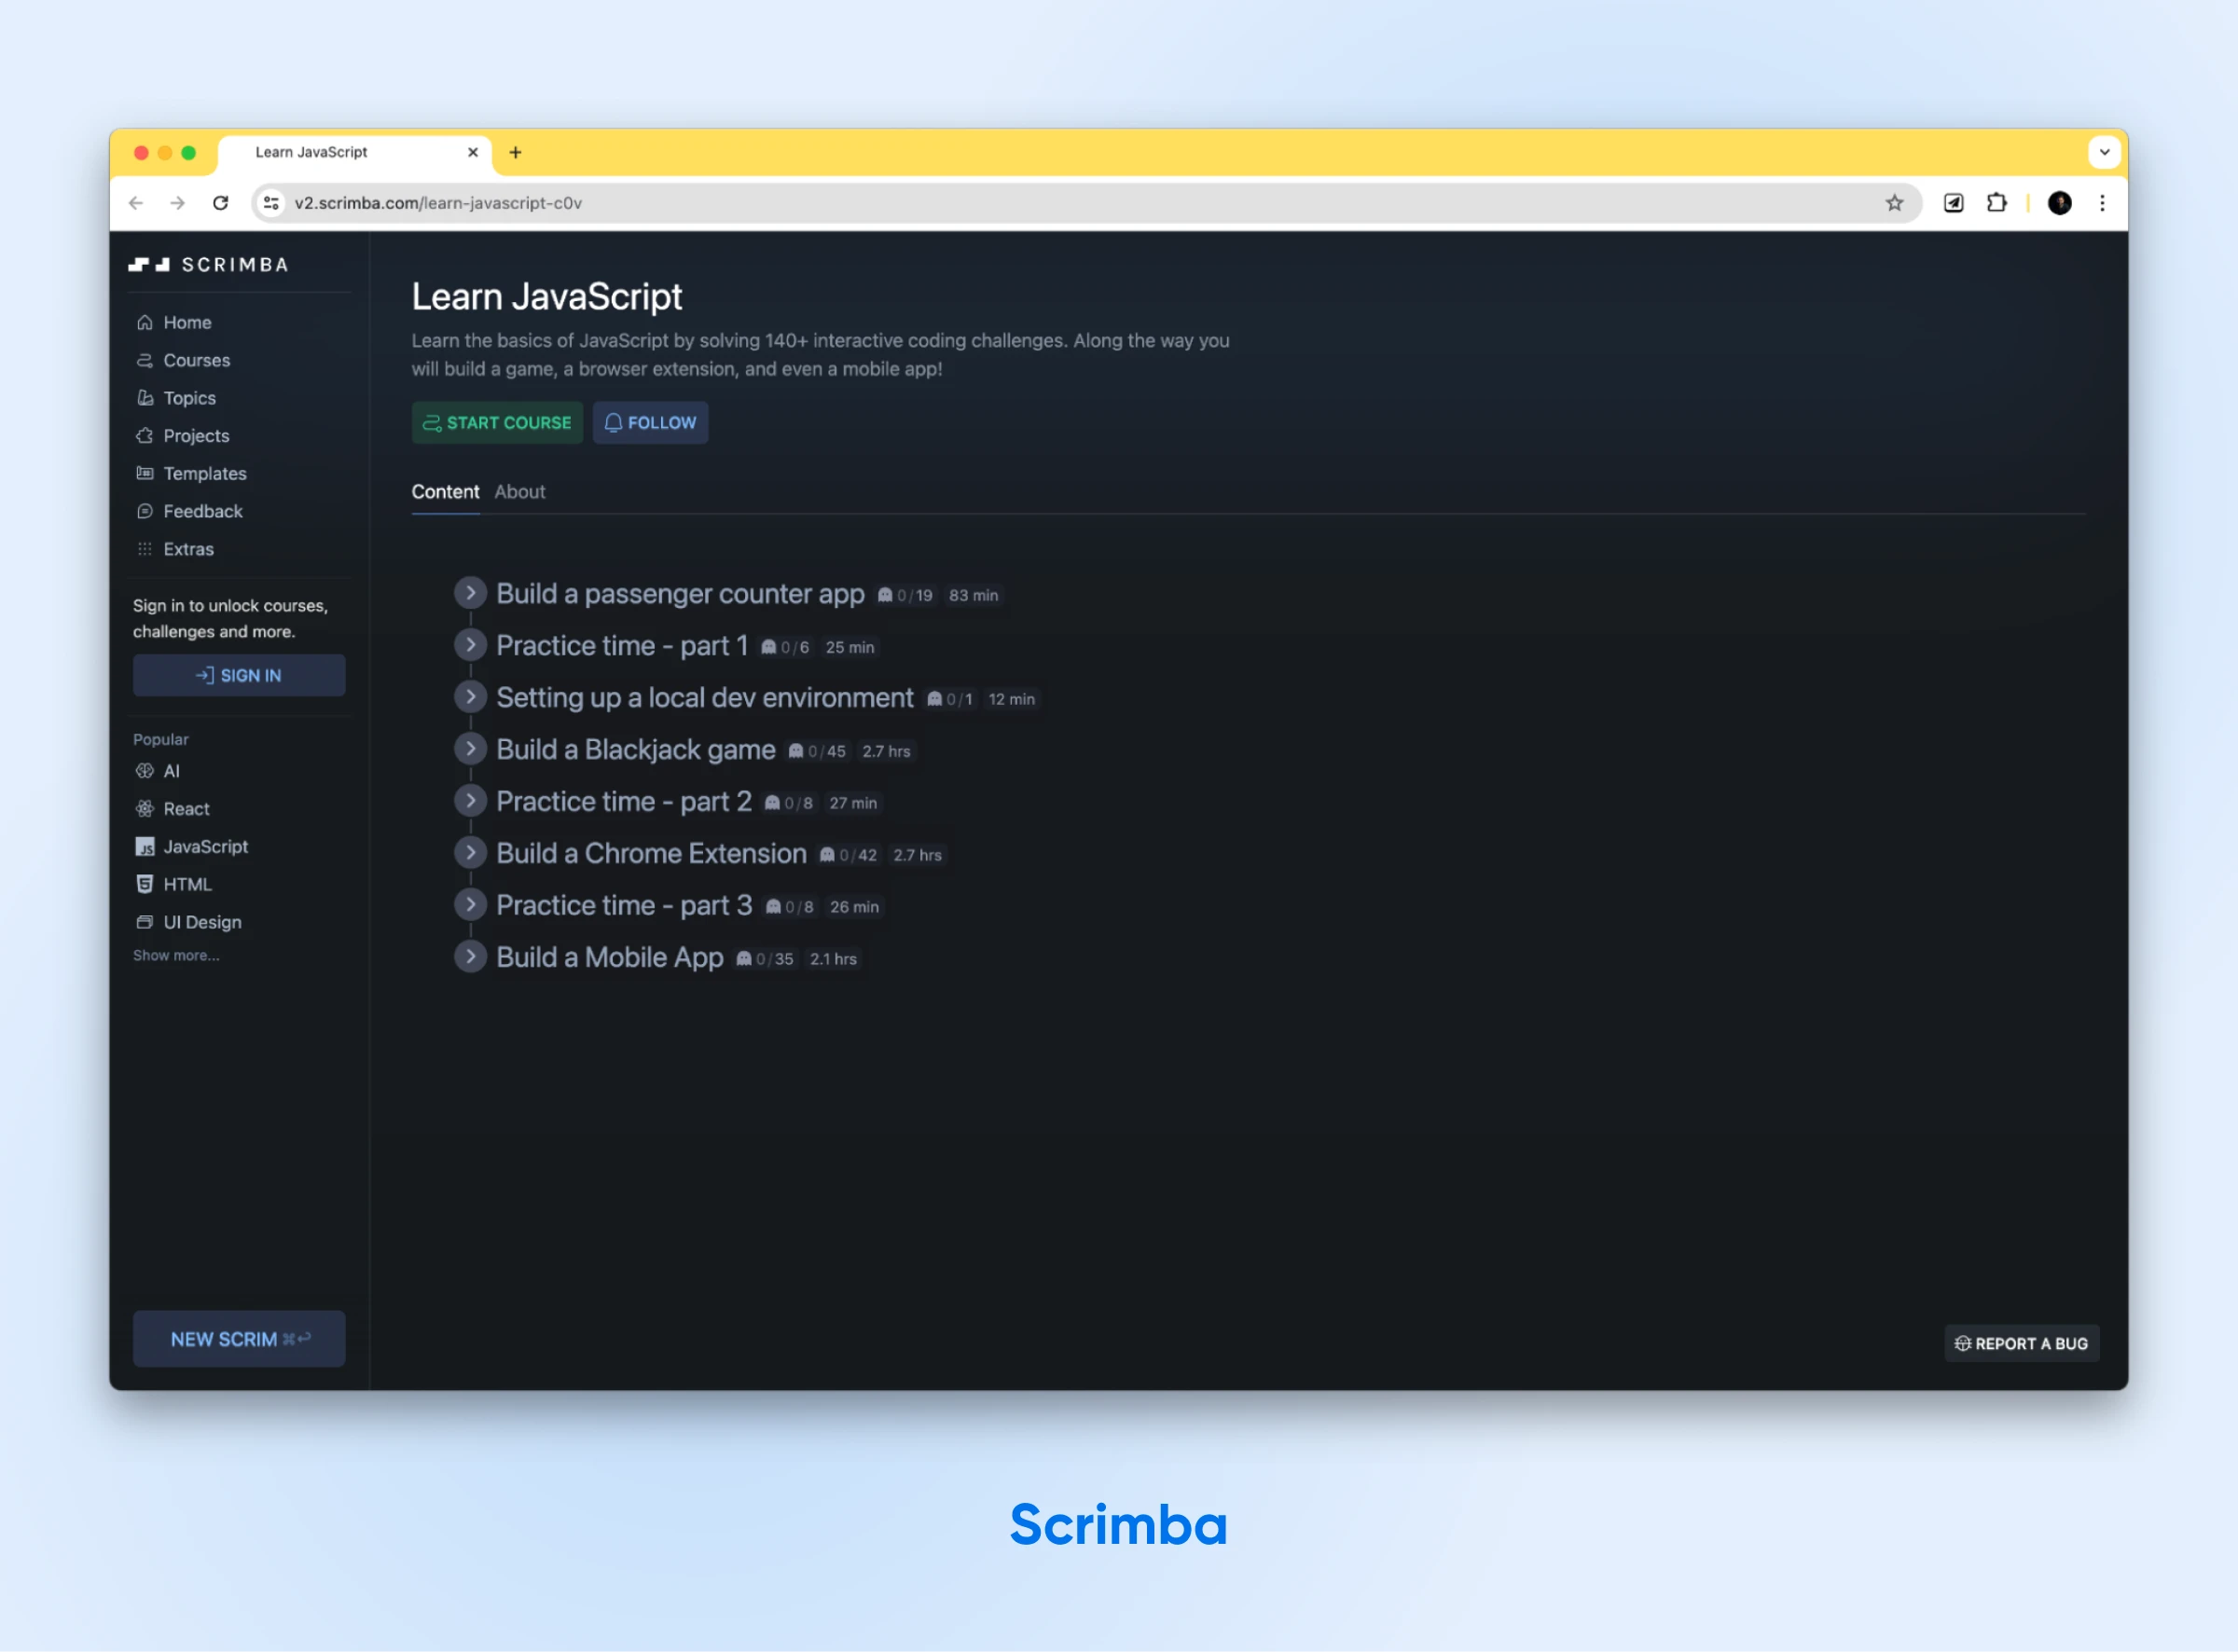 Scrimba's workspace opened to "Learn JavaScript" with a nav-menu on the left, and a button to "START COURSE" on the right.